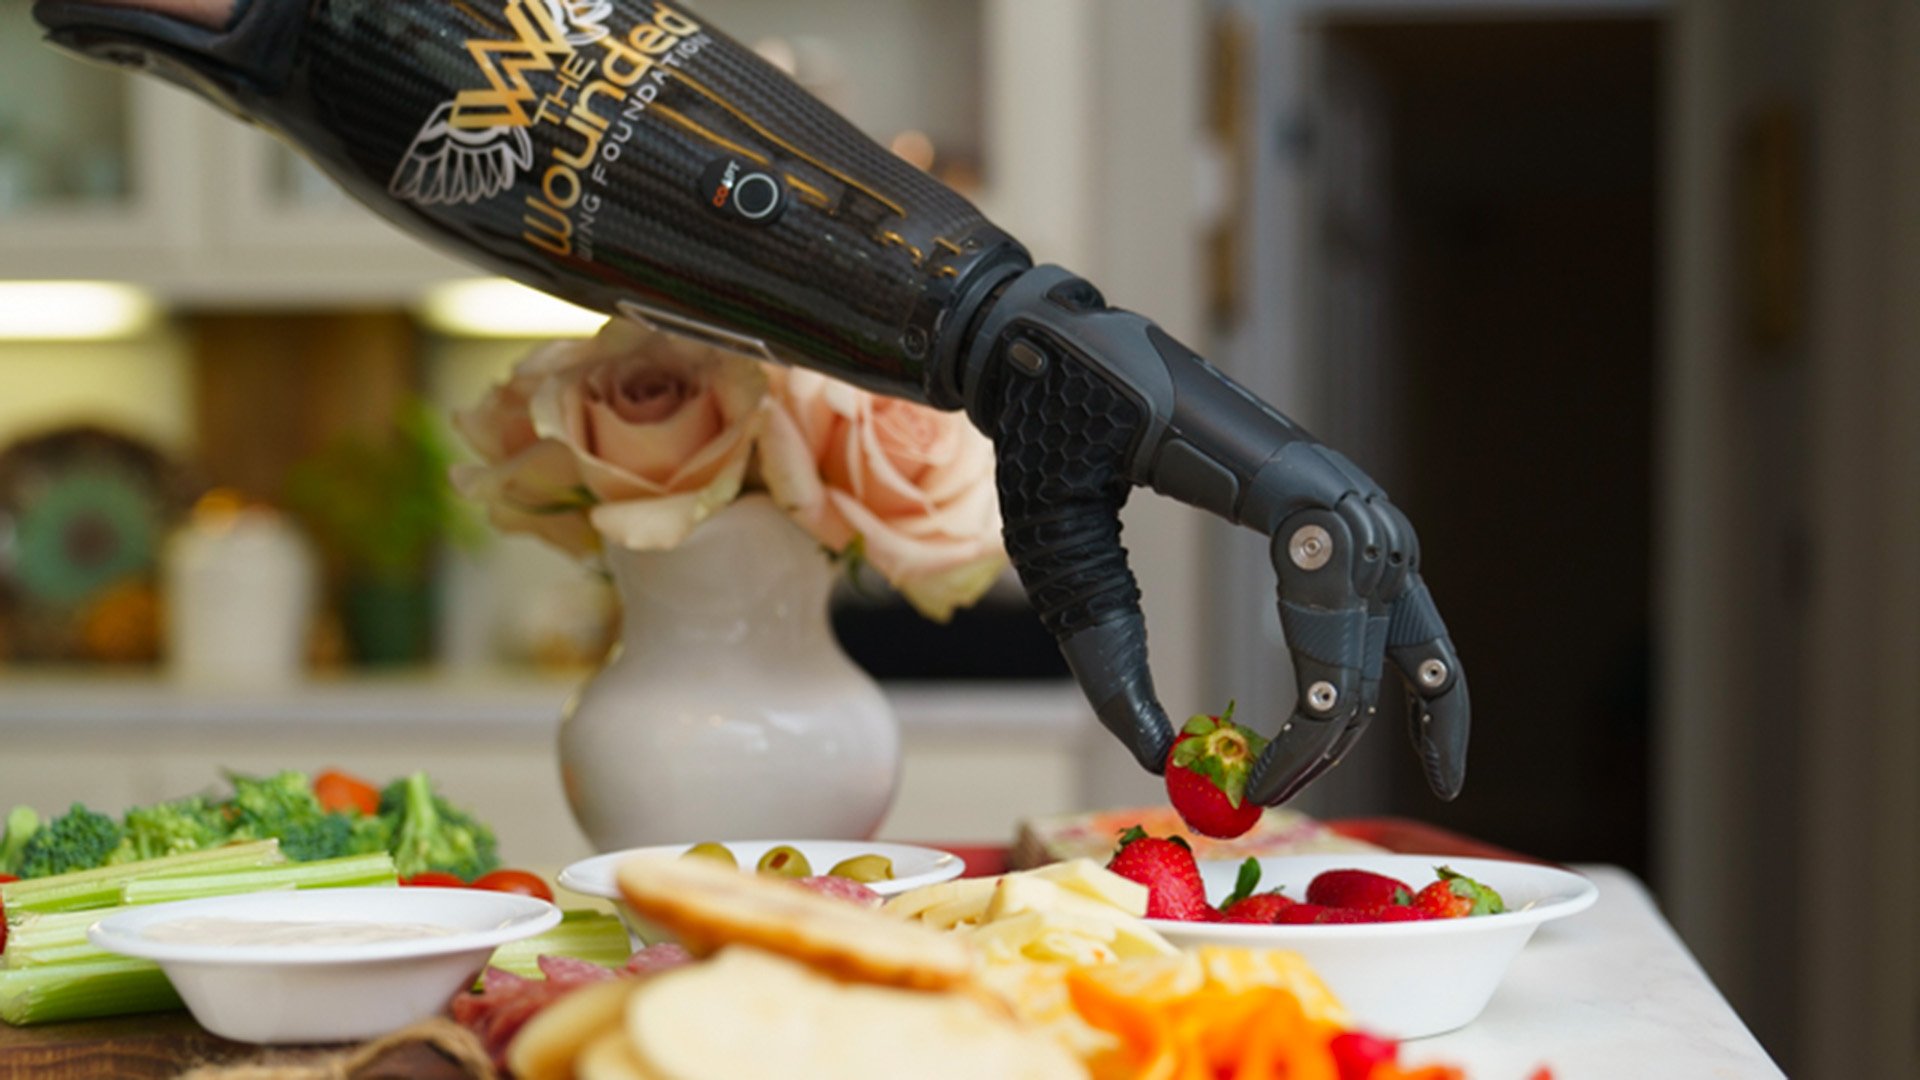 The Taska Hand is useful in the kitchen grasping small objects.